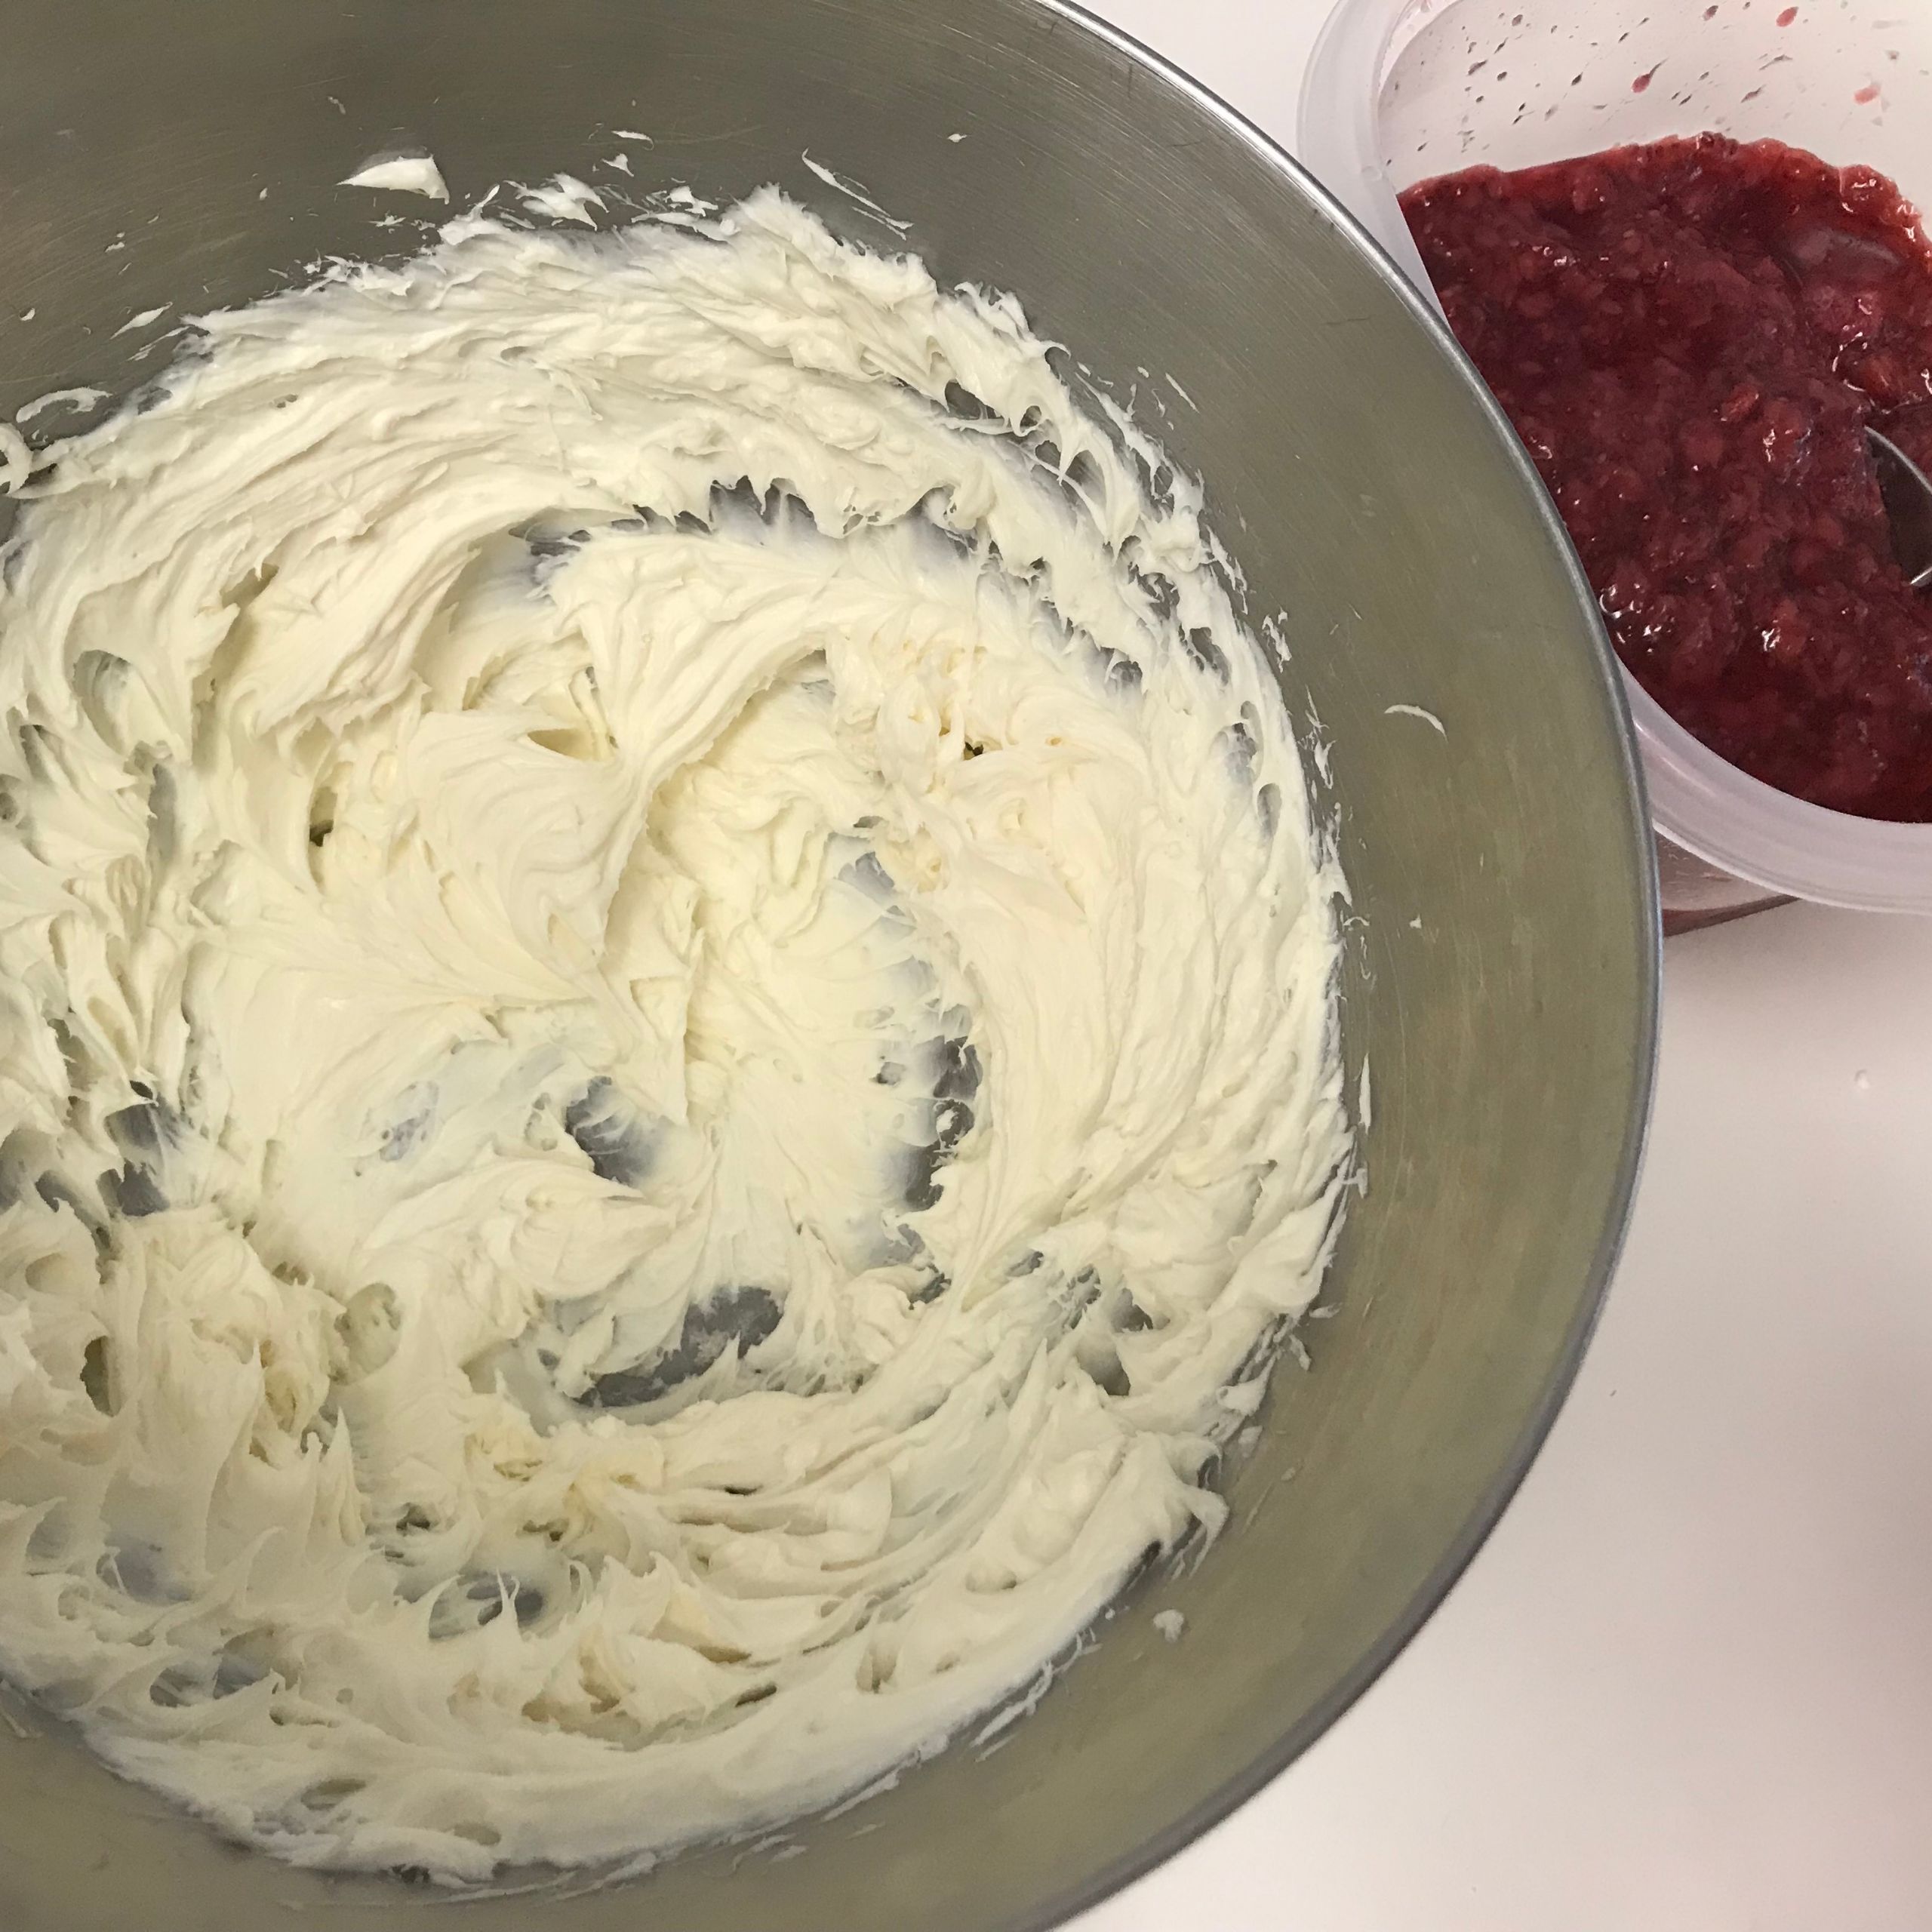 Whipped cream cheese and jam in containers | my curated tastes